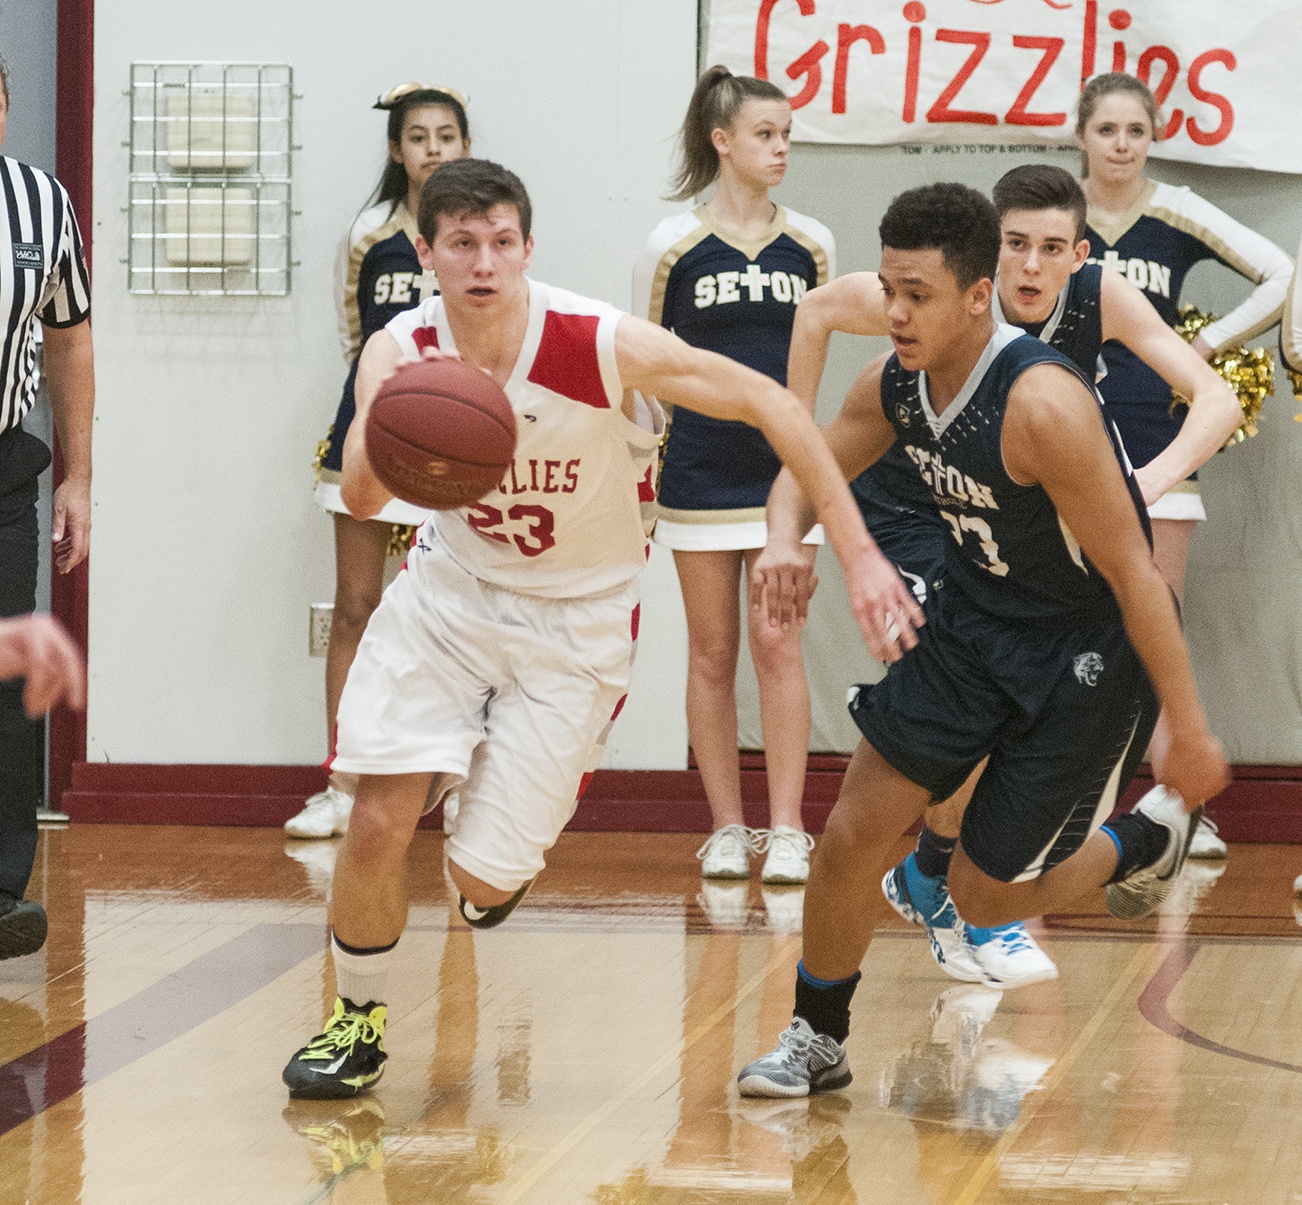 A 37-point first quarter paced Hoquiam’s district win over Seton Catholic